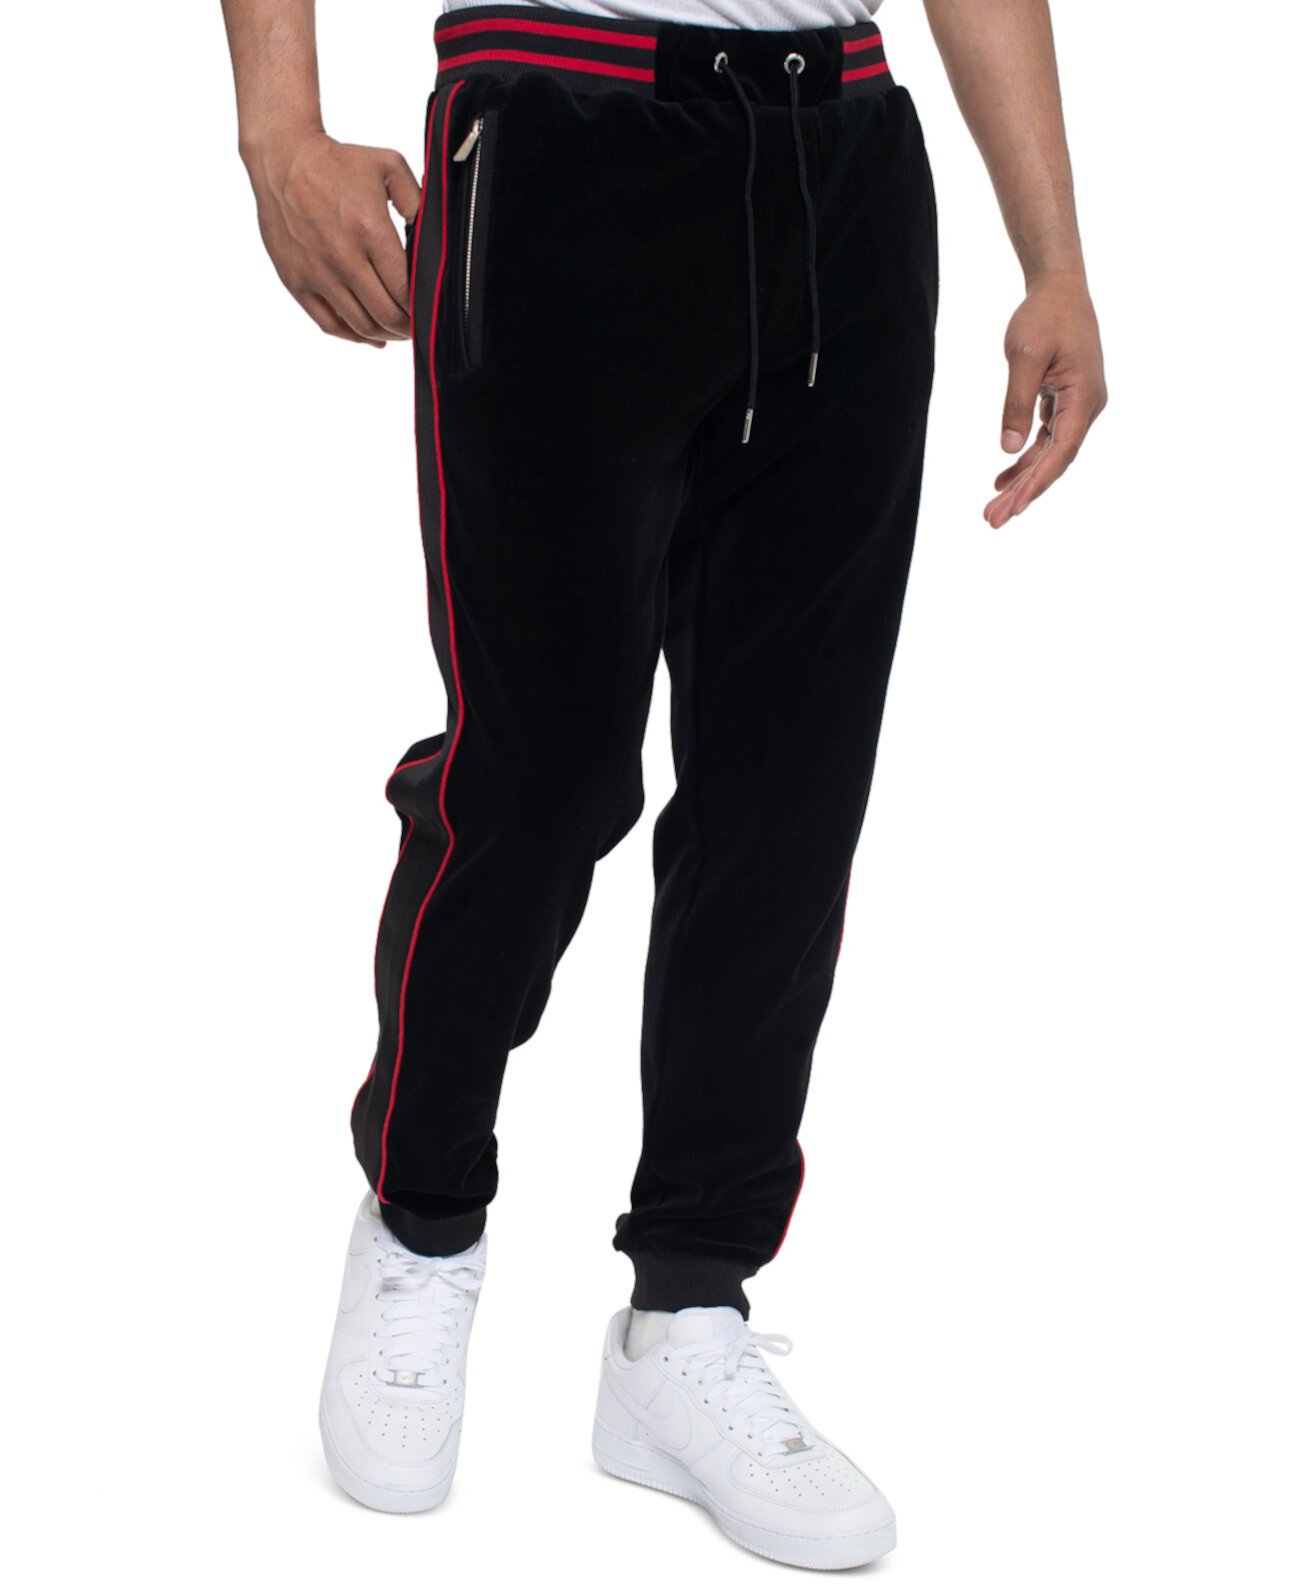 Velour Men's  Track Pant with Piping Sean John